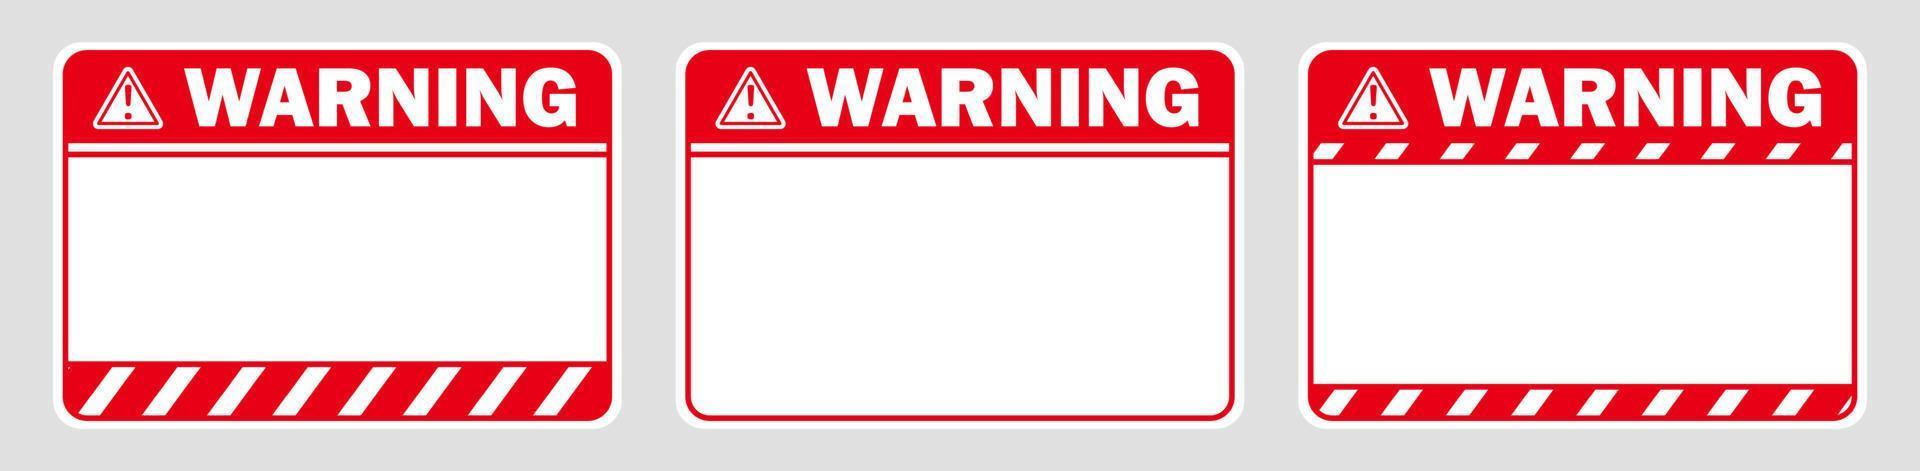 warning caution white red sign text space area message box sticker label object goods commodity vector